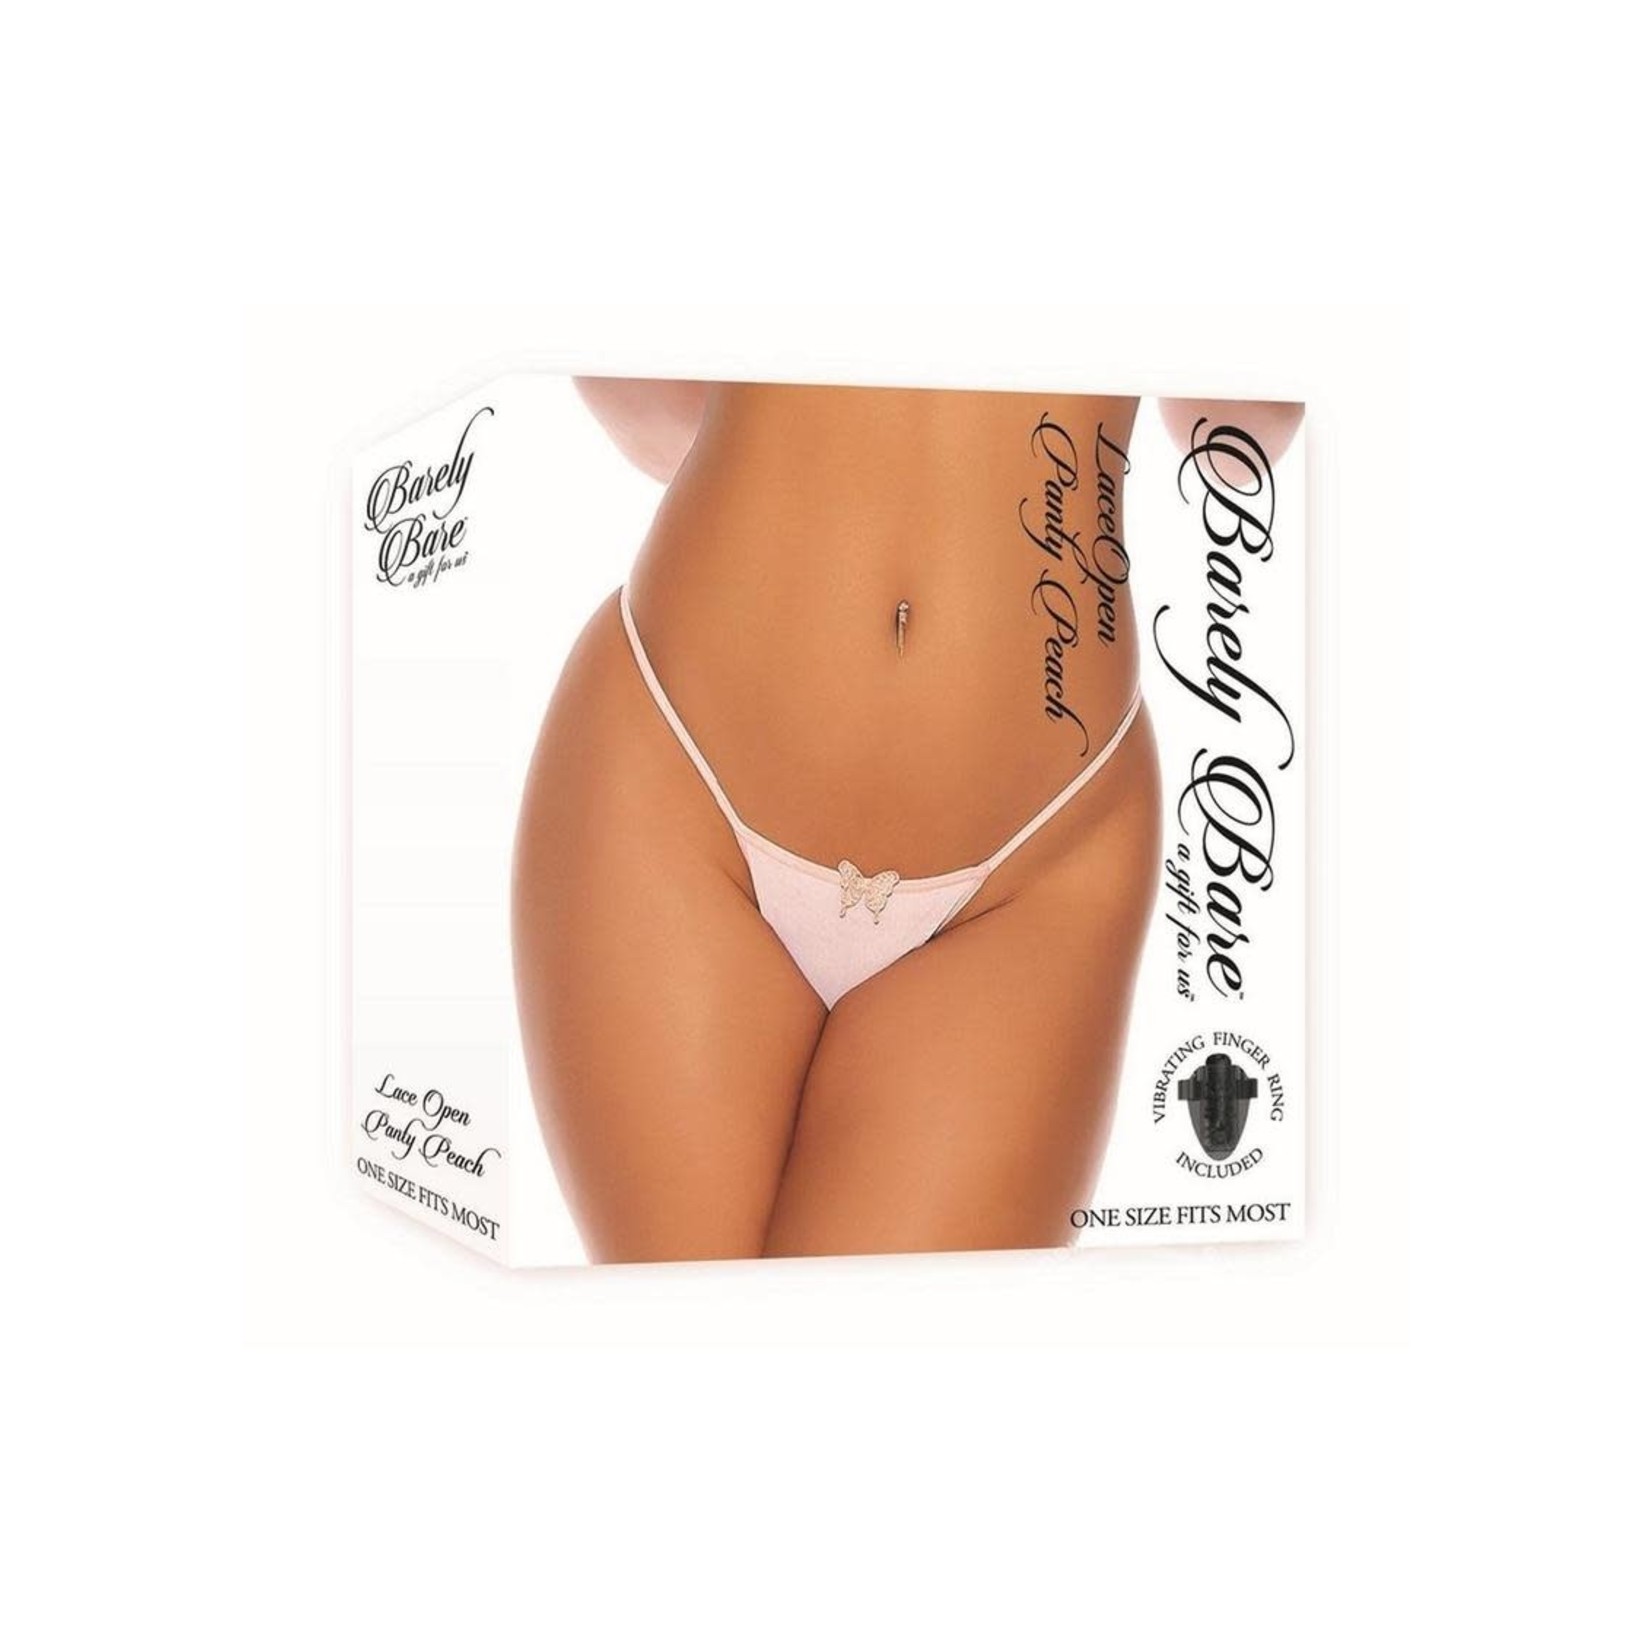 Barely Bare Lace Open Panty - O/S - Peach